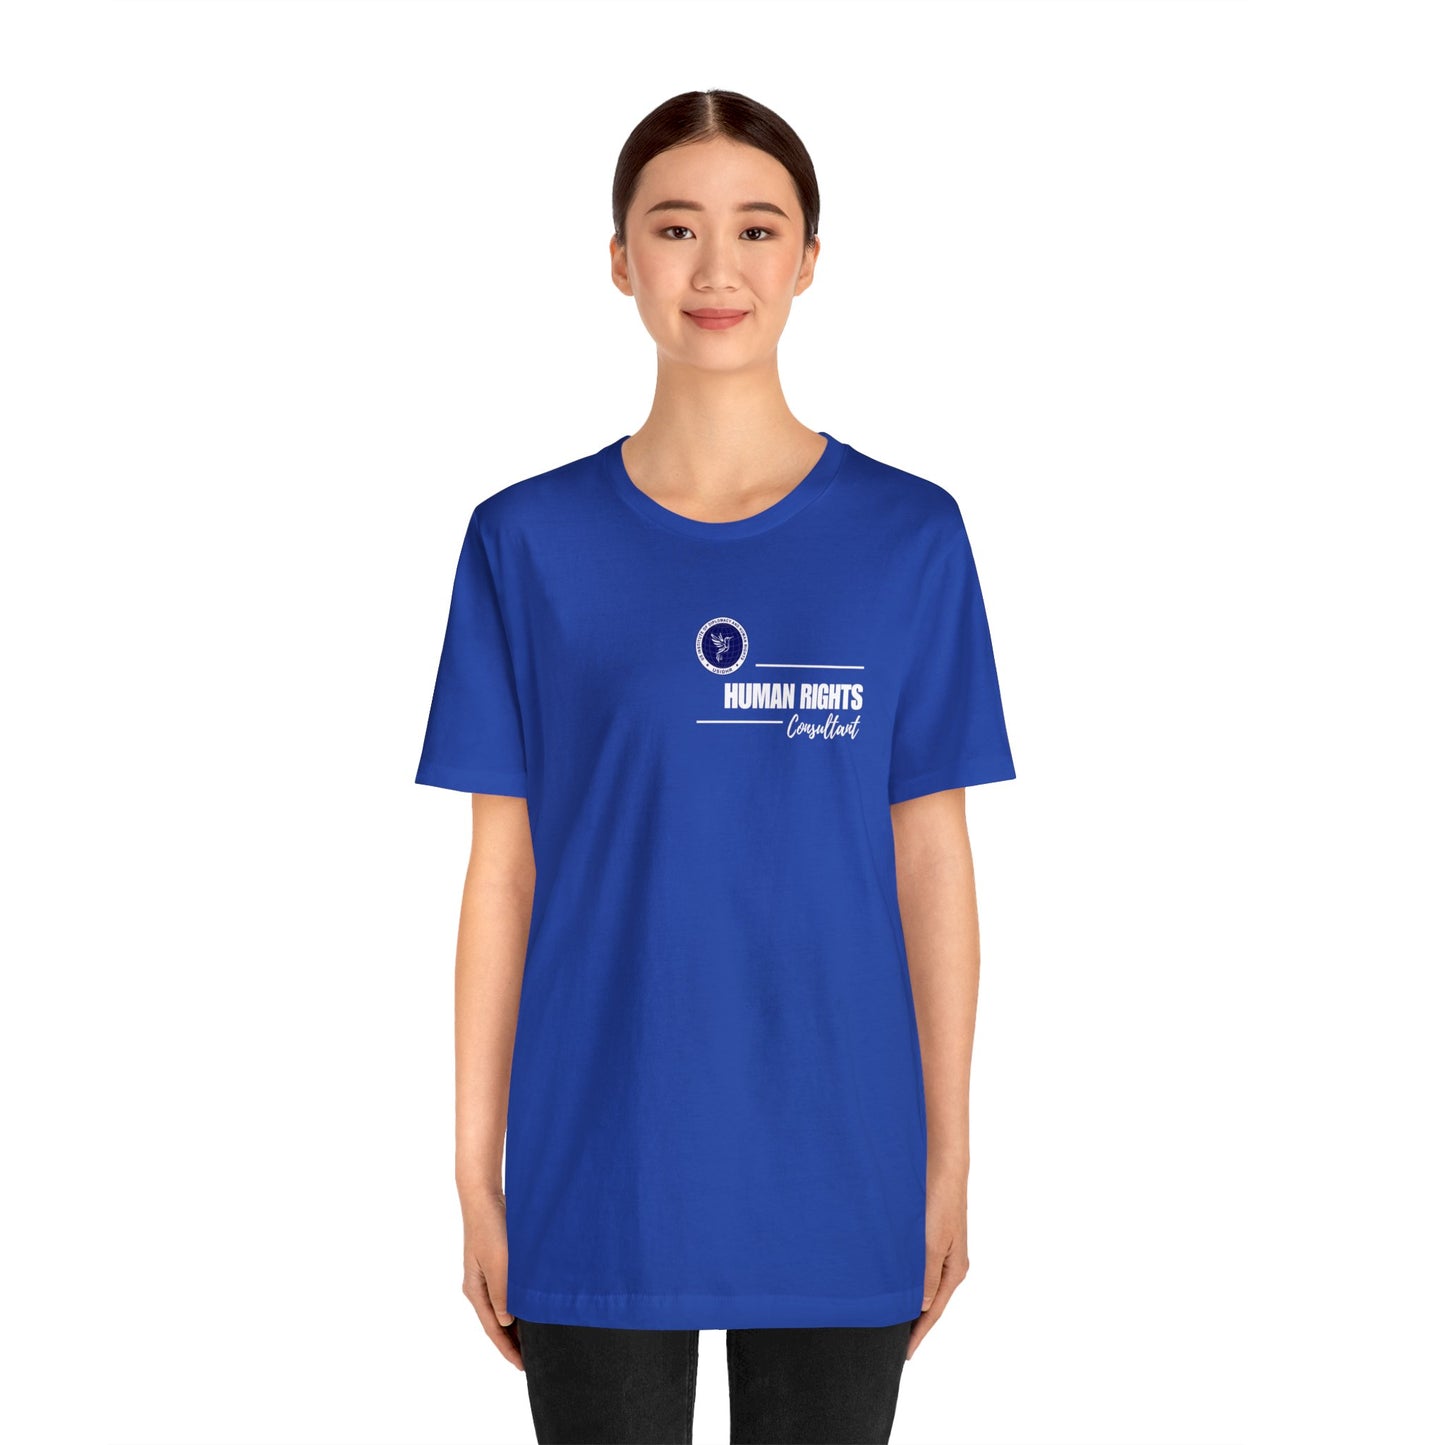 Human Rights Consultant Short Sleeve Tee